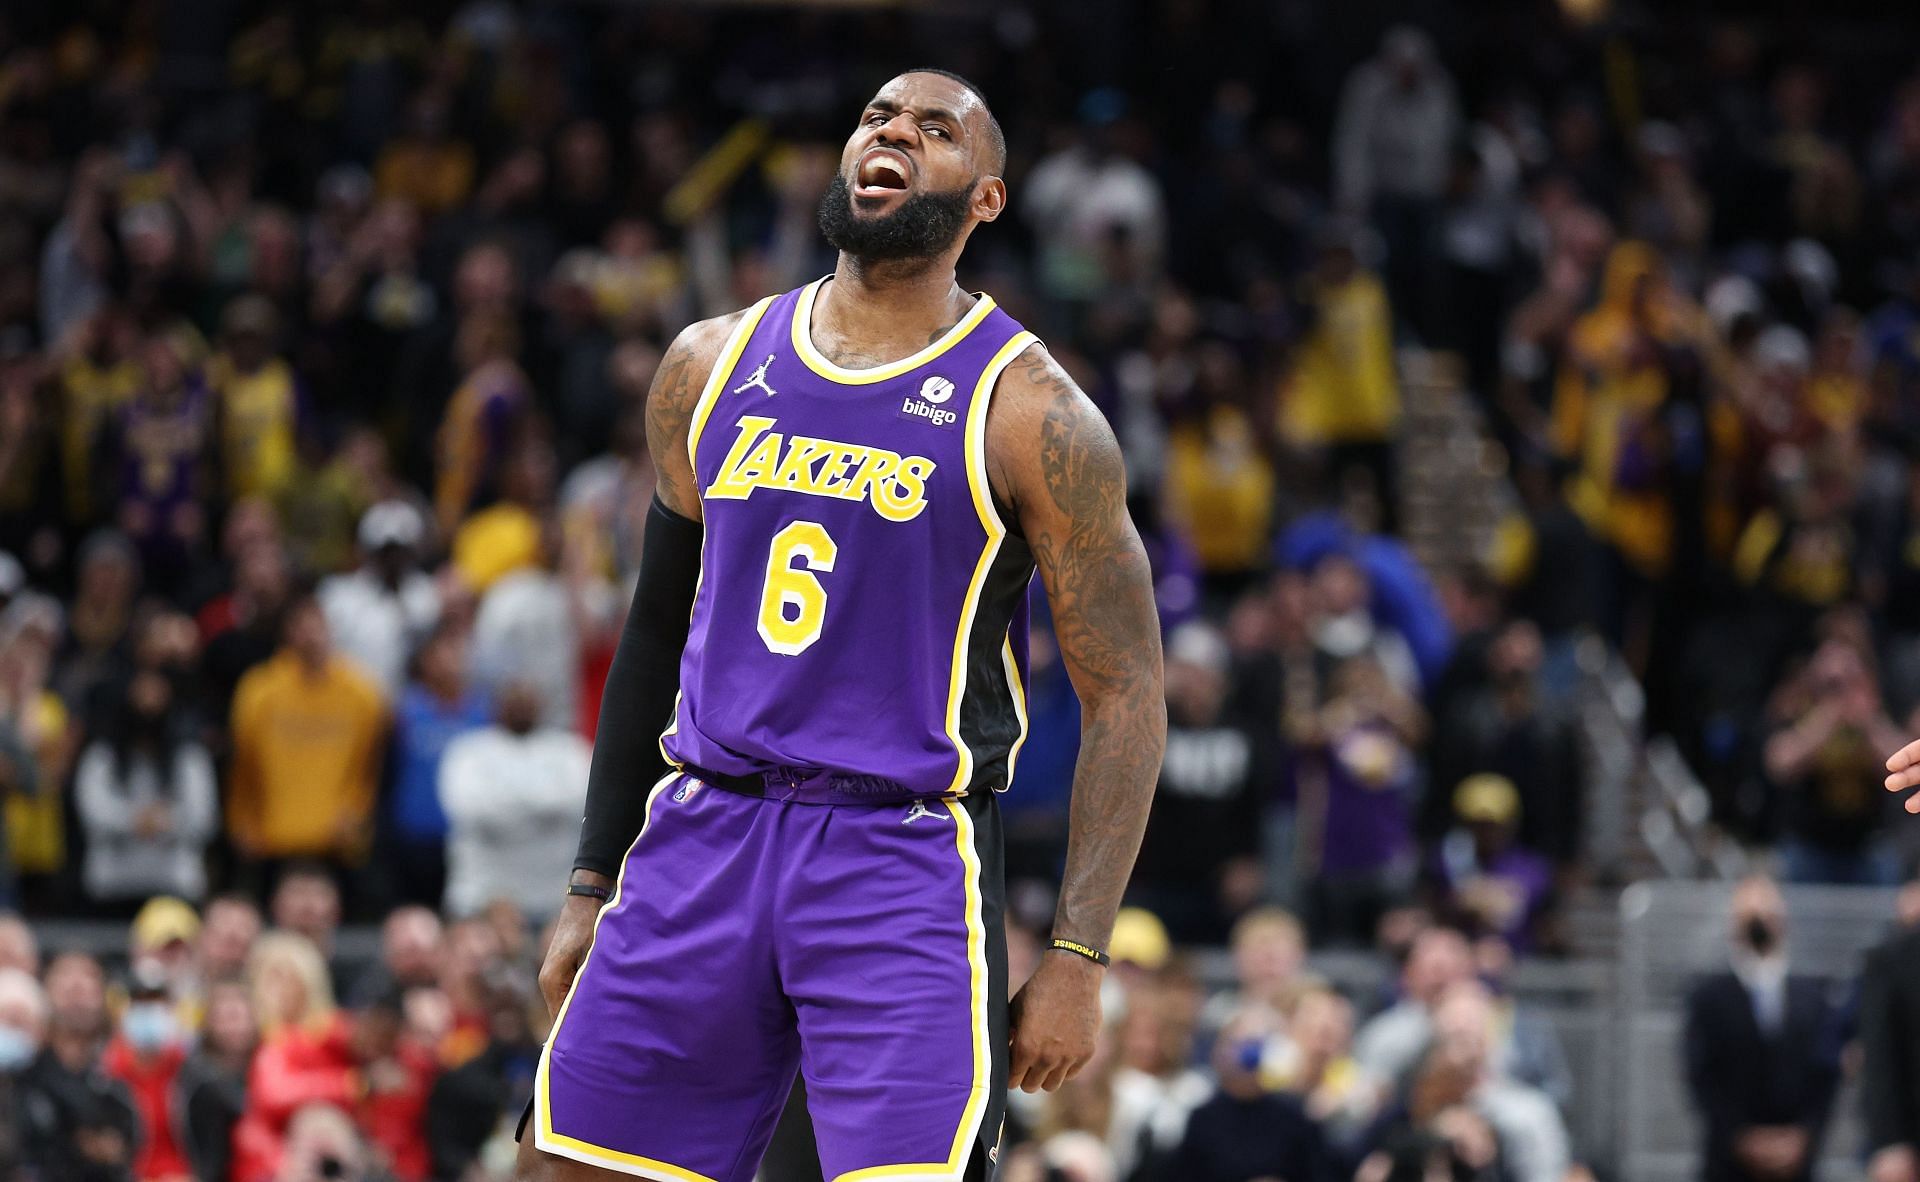 Los Angeles Lakers All-Star Lebron James showing some emotion